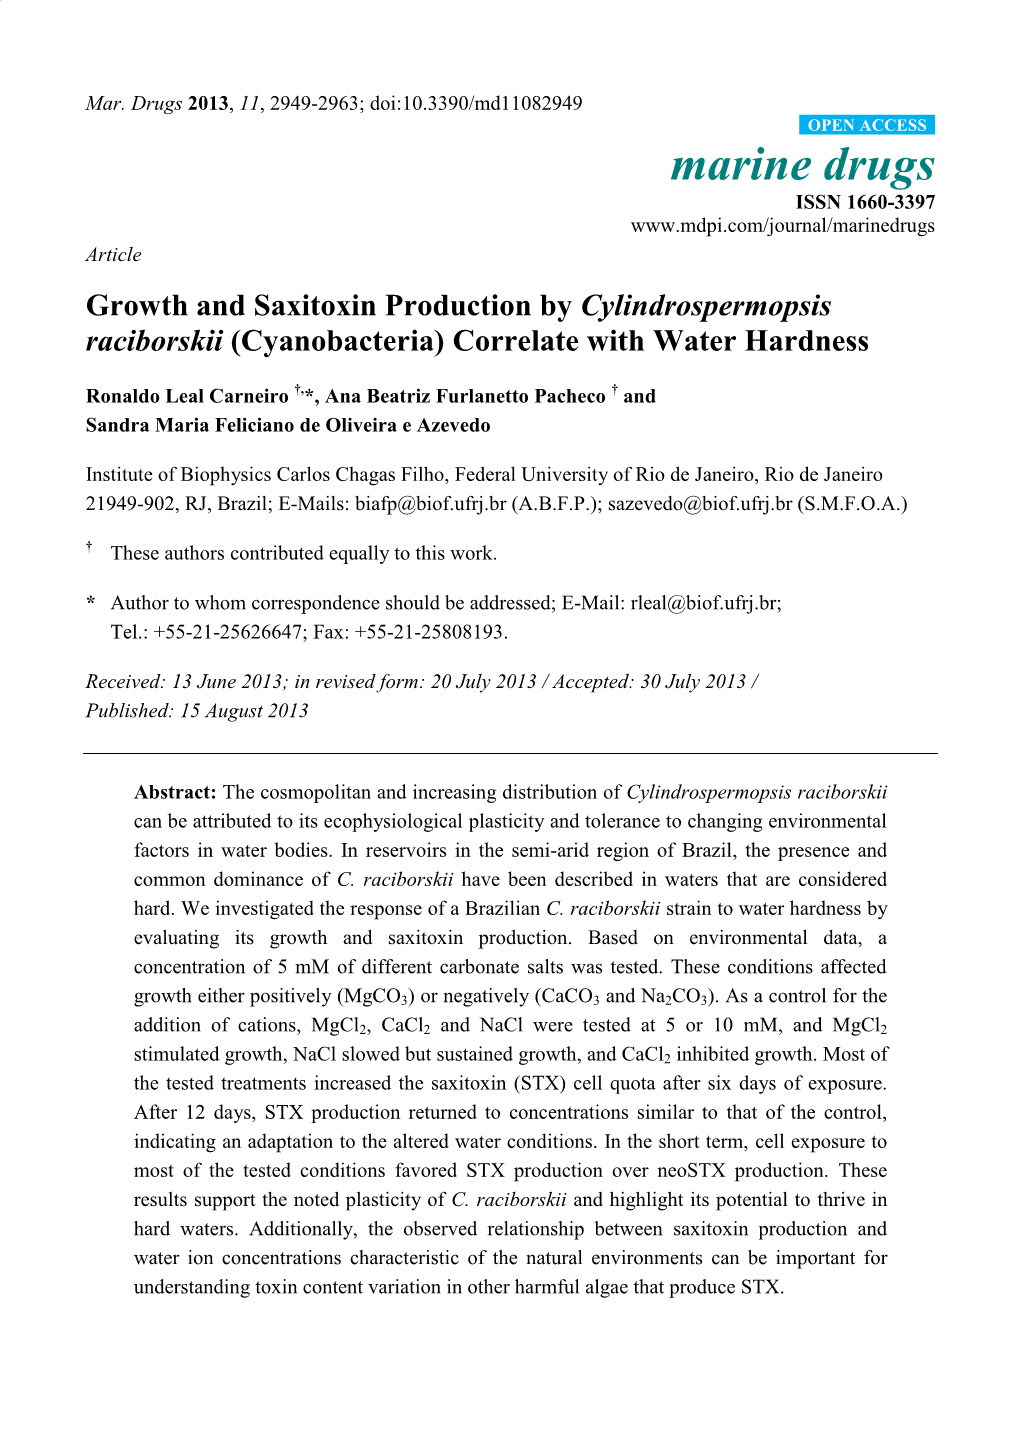 Growth and Saxitoxin Production by Cylindrospermopsis Raciborskii (Cyanobacteria) Correlate with Water Hardness